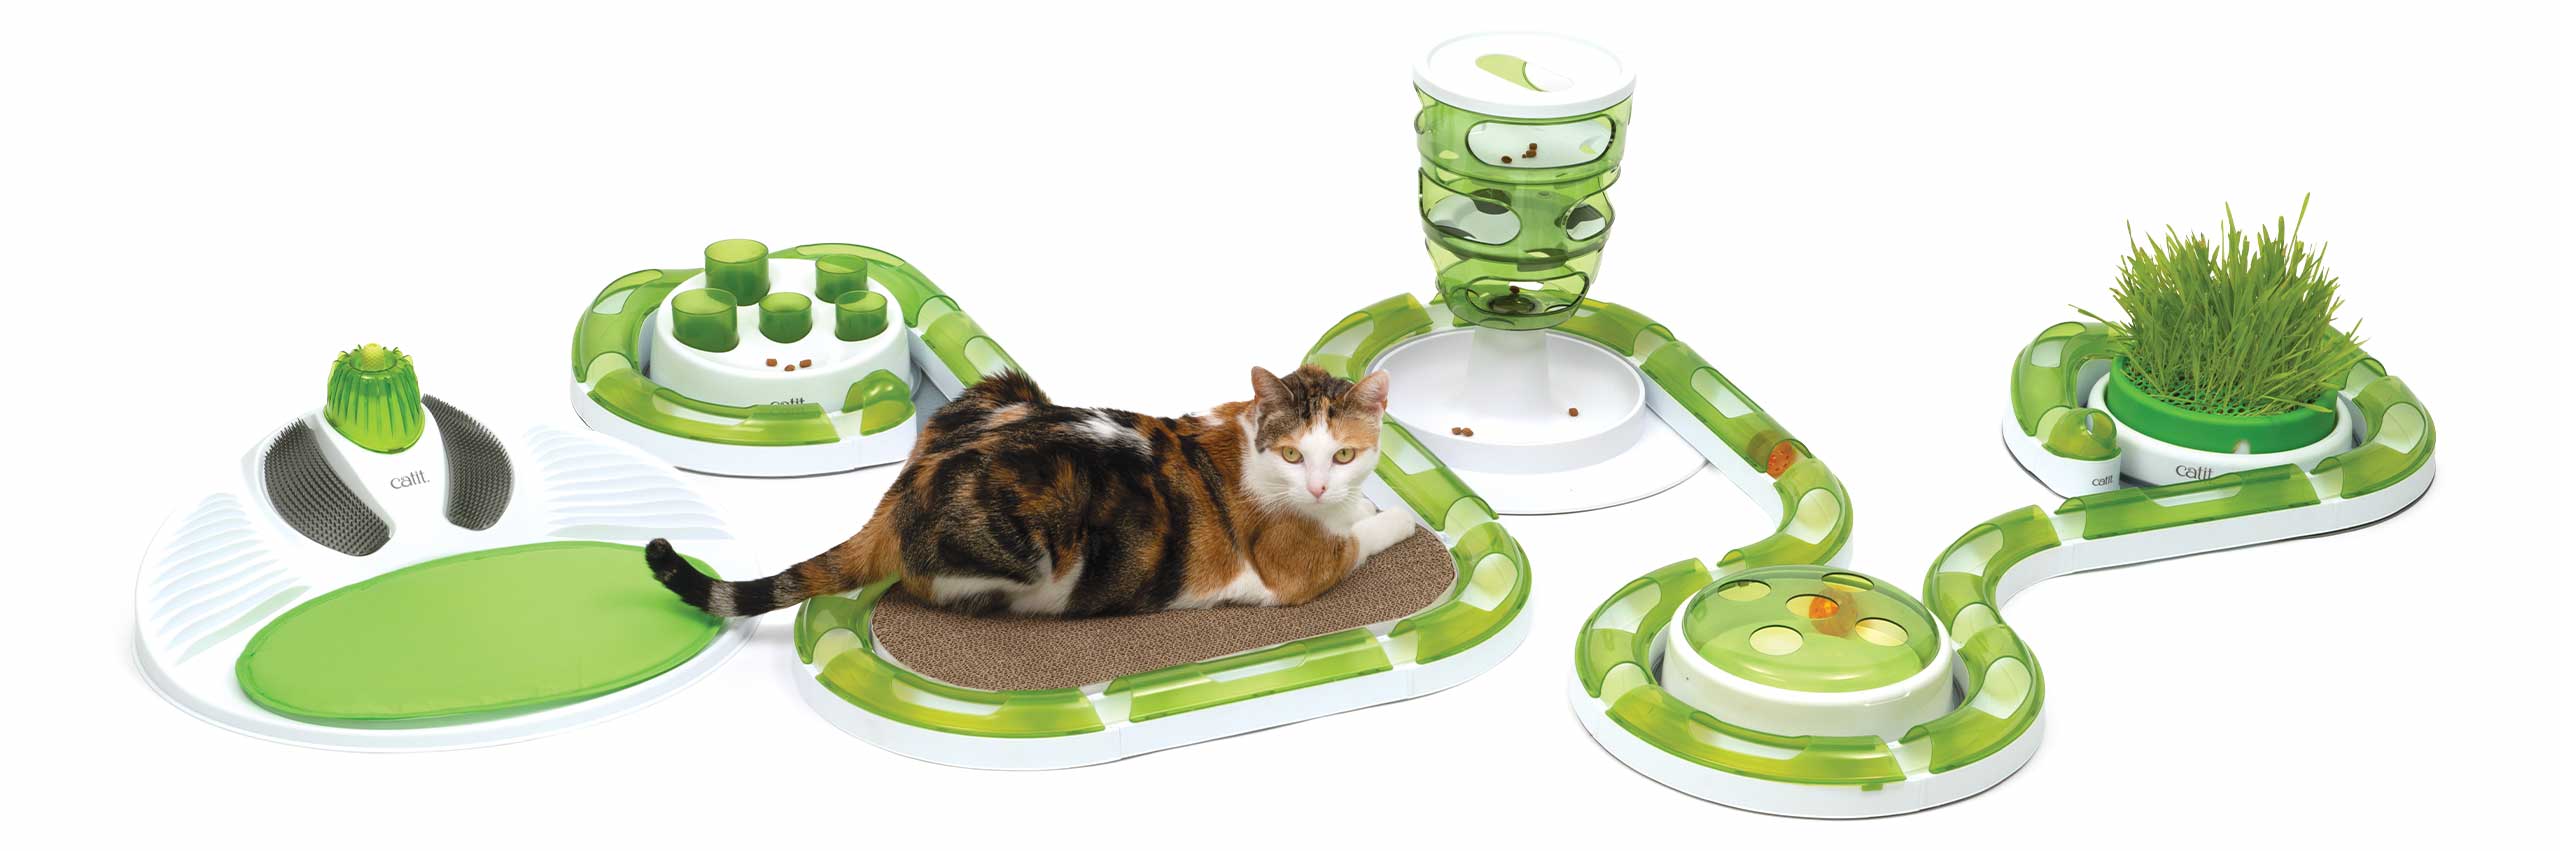 Cat chilling on the Oval Scratcher in their Catit Senses Playground